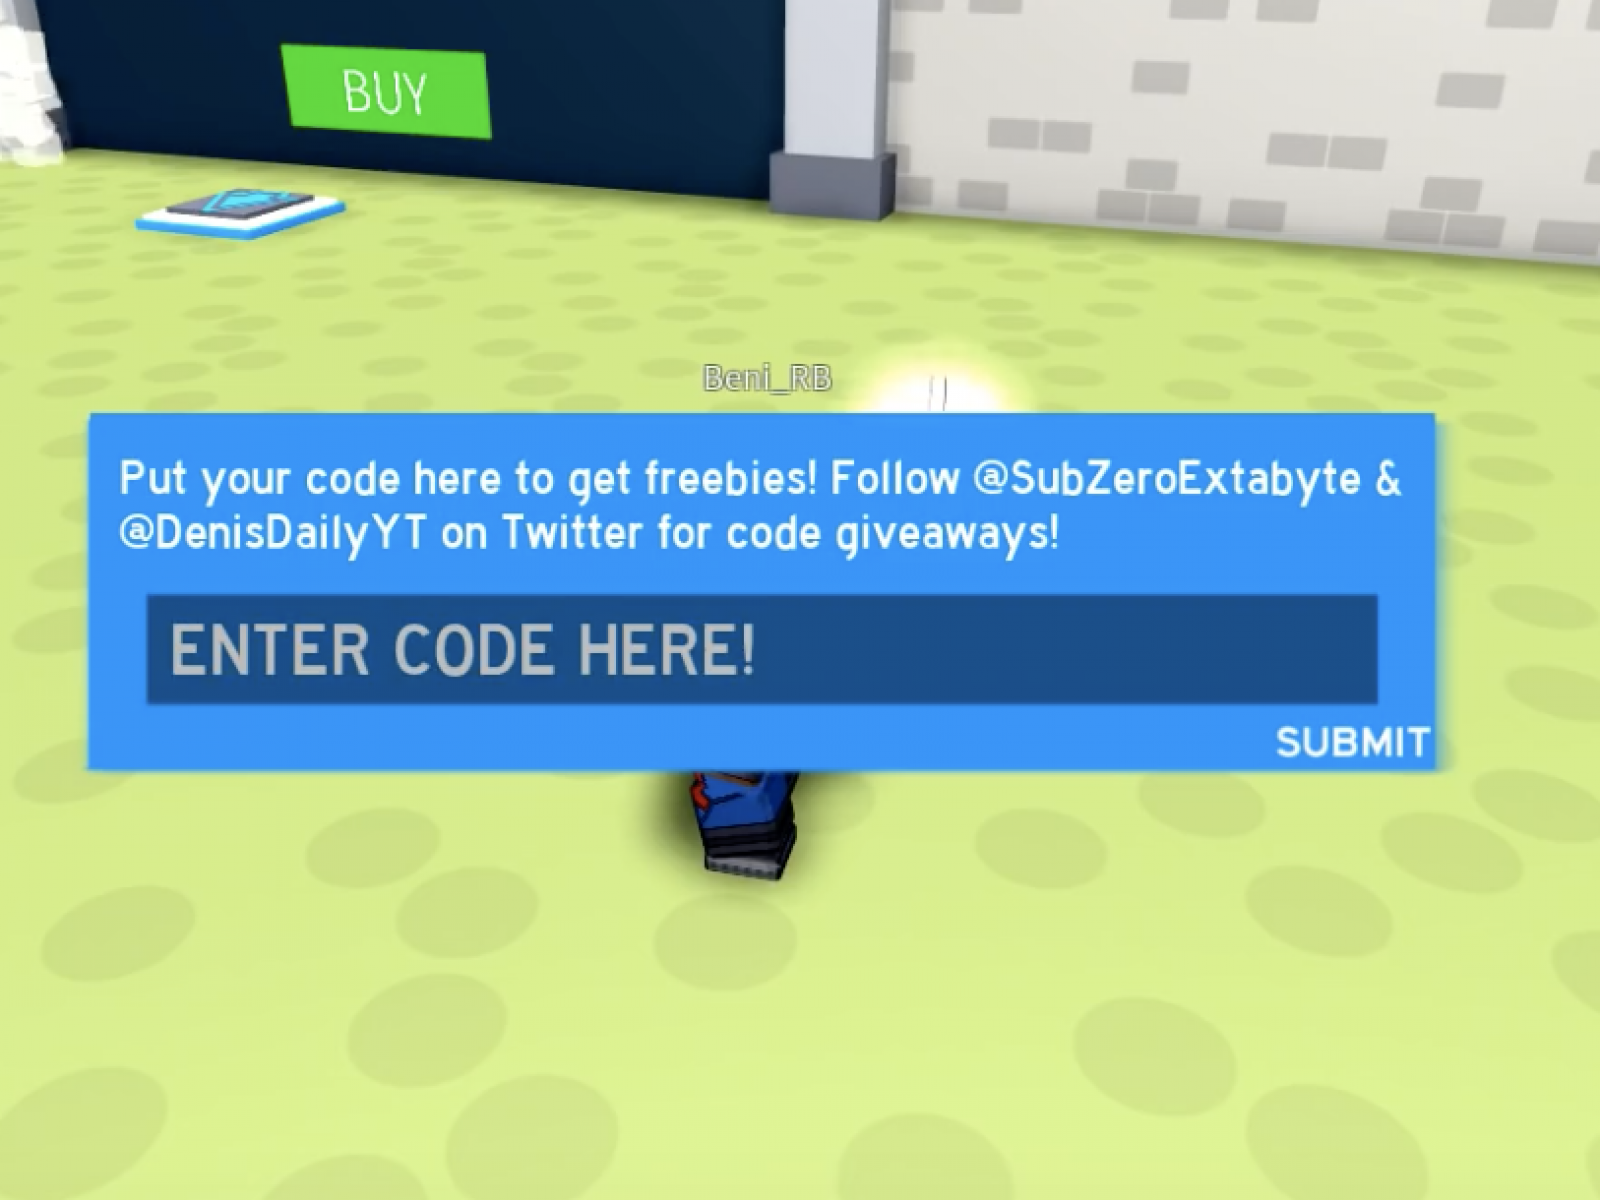 Roblox Codes Put In